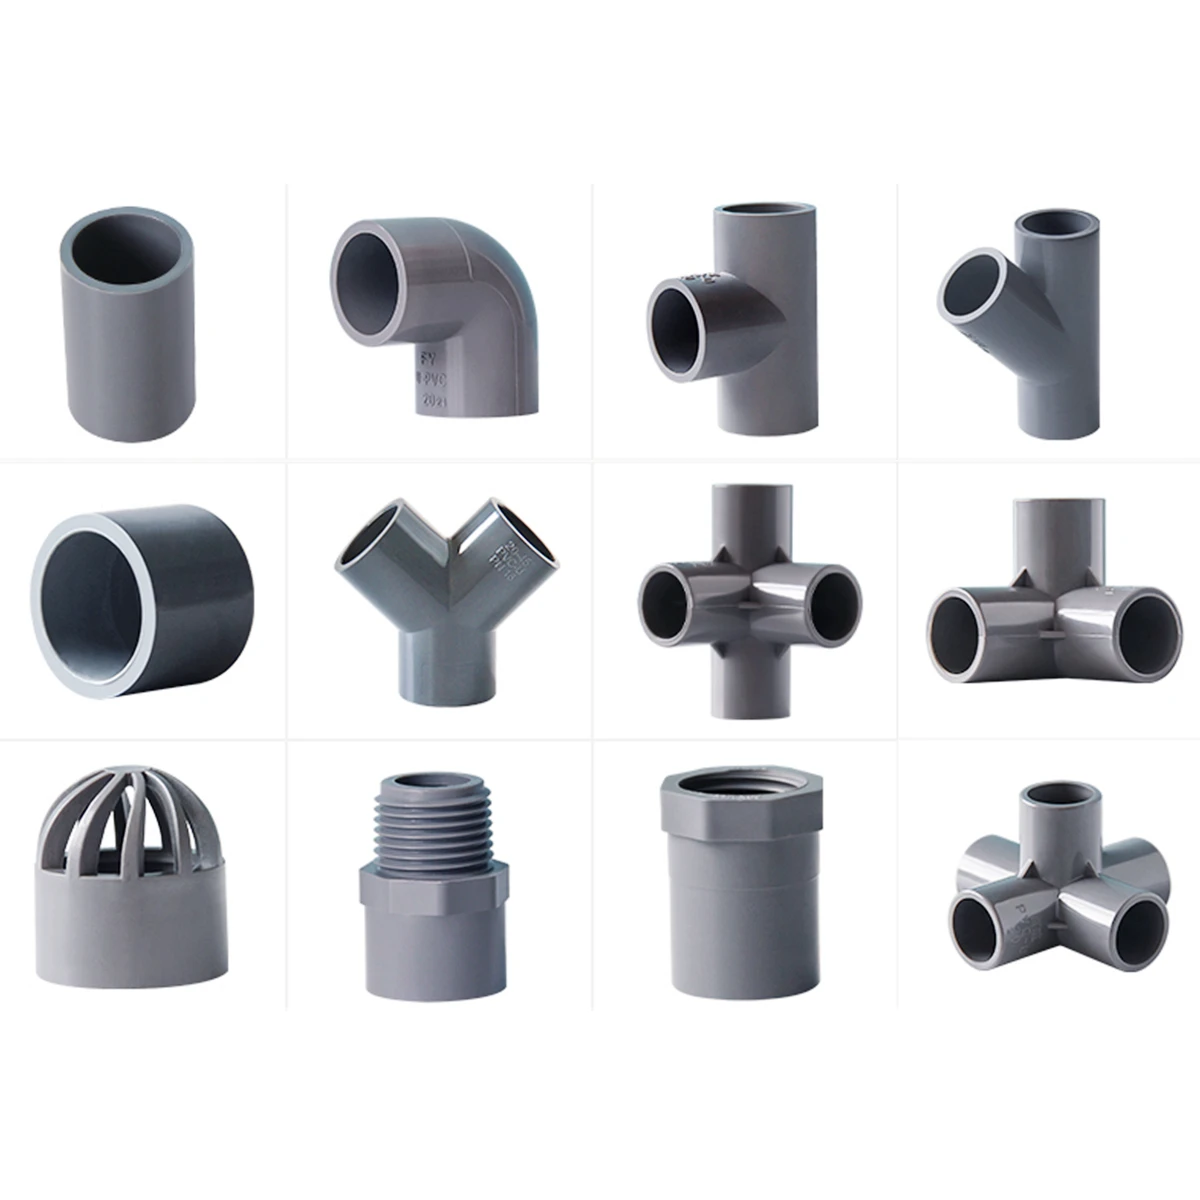 Gray ID 20/25/32mm PVC Pipe Connector PVC Straight Elbow Tee Joints Aquarium Pipe Fittings Home DIY Tube 3 4 5 6 Ways Joints